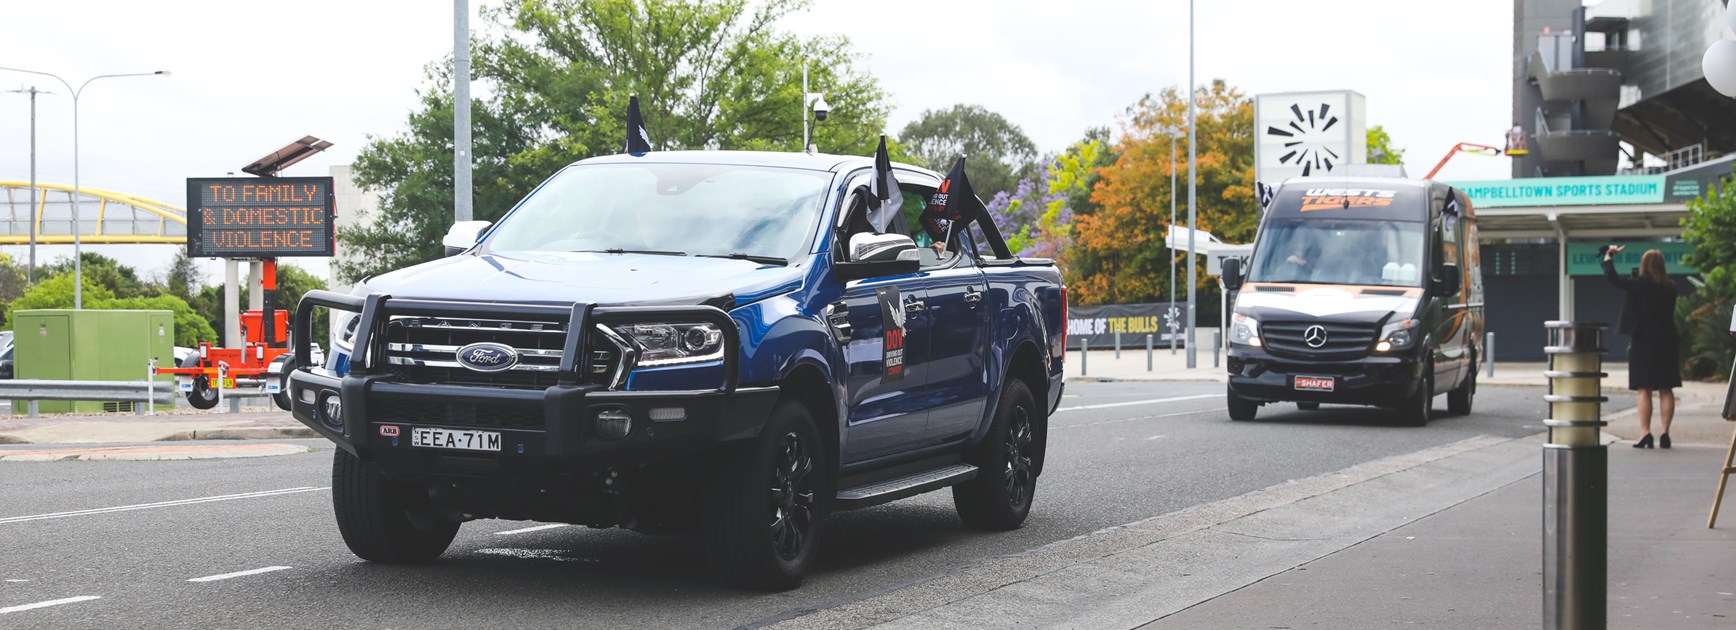 Wests Tigers take part in Driving Out Violence Convoy